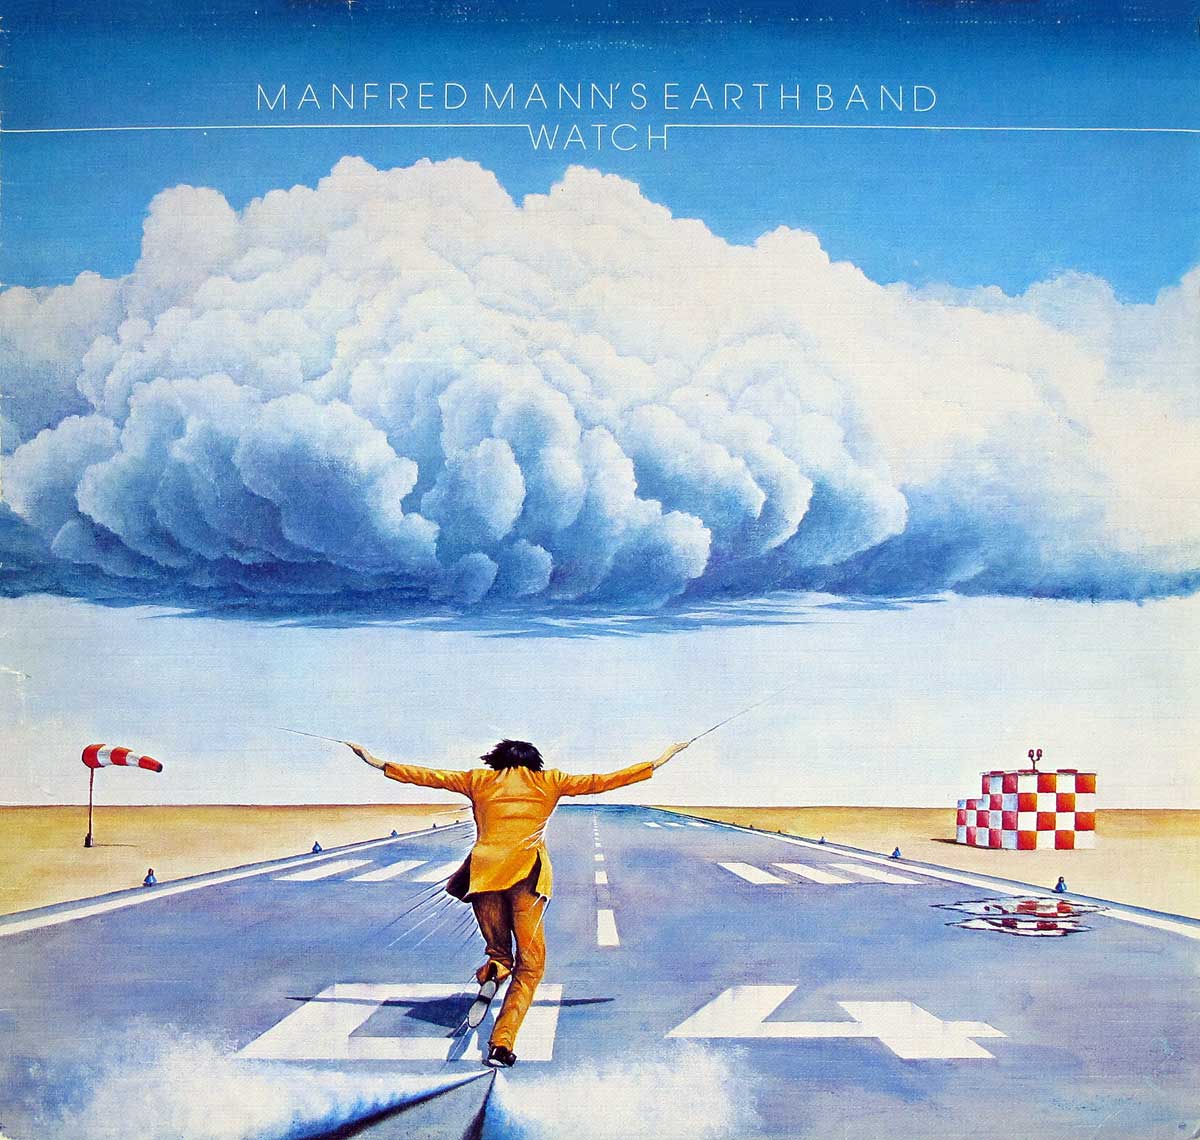 large album front cover photo of: MANFRED MANN'S EARTH BAND WATCH 